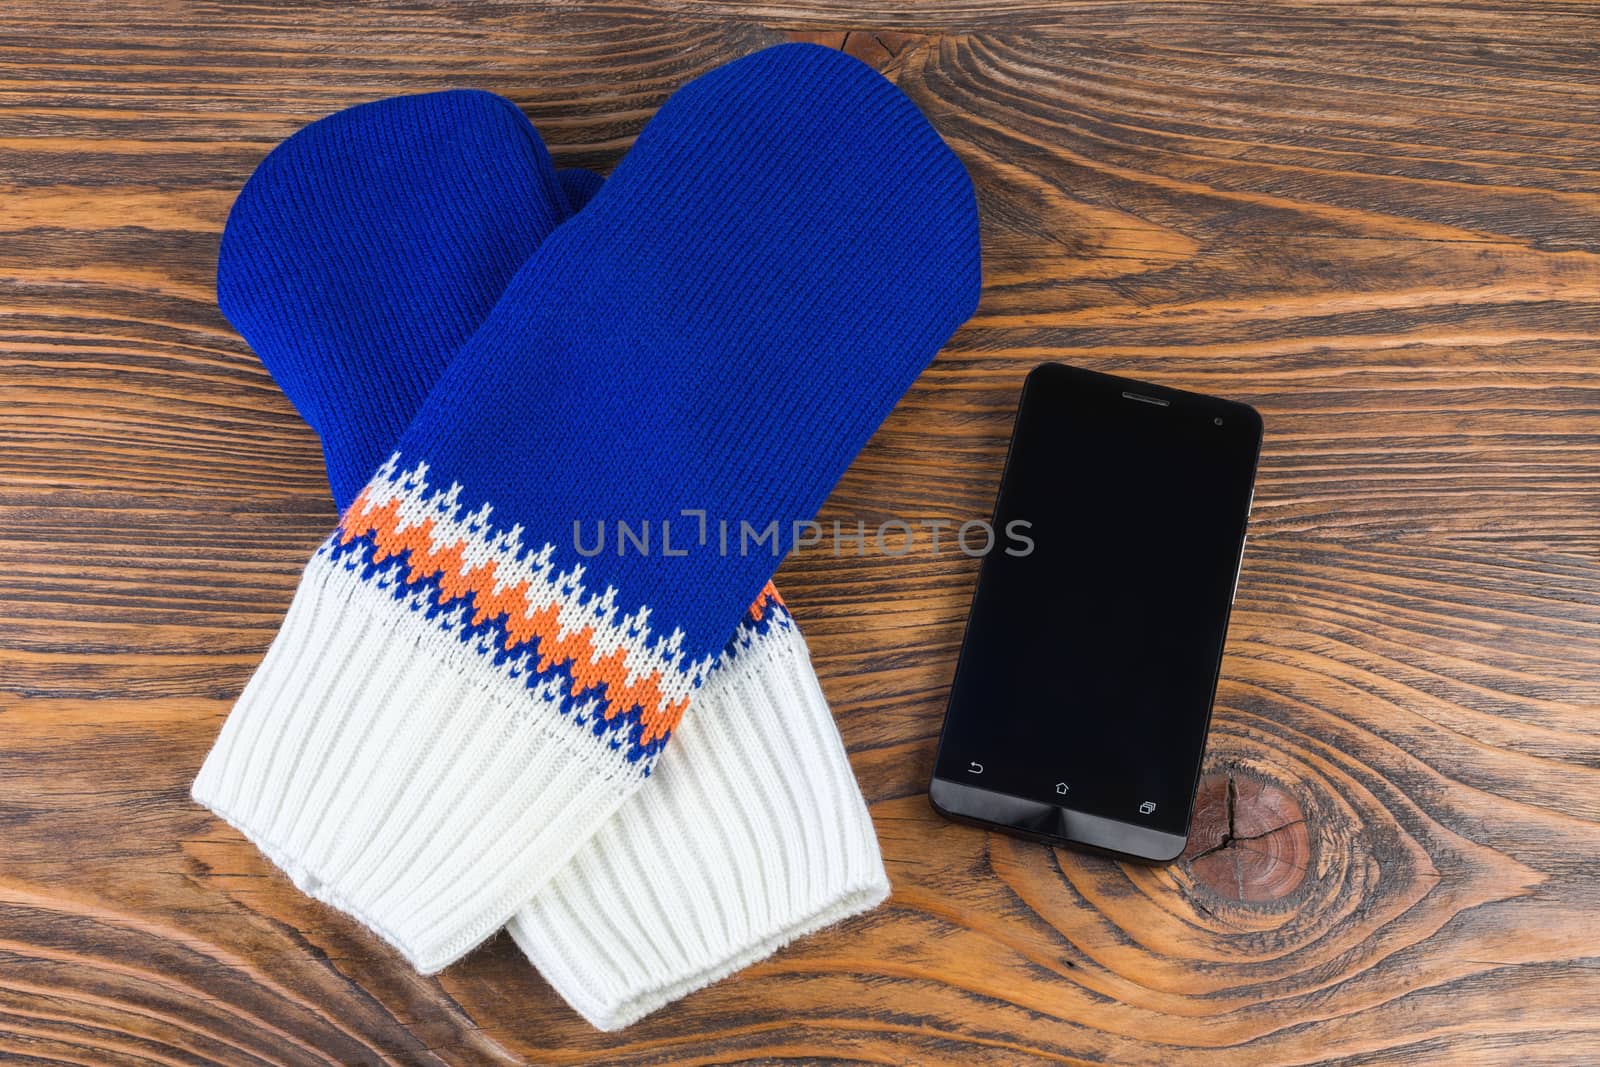 blue and white knited mittens with cellphone on wooden background.